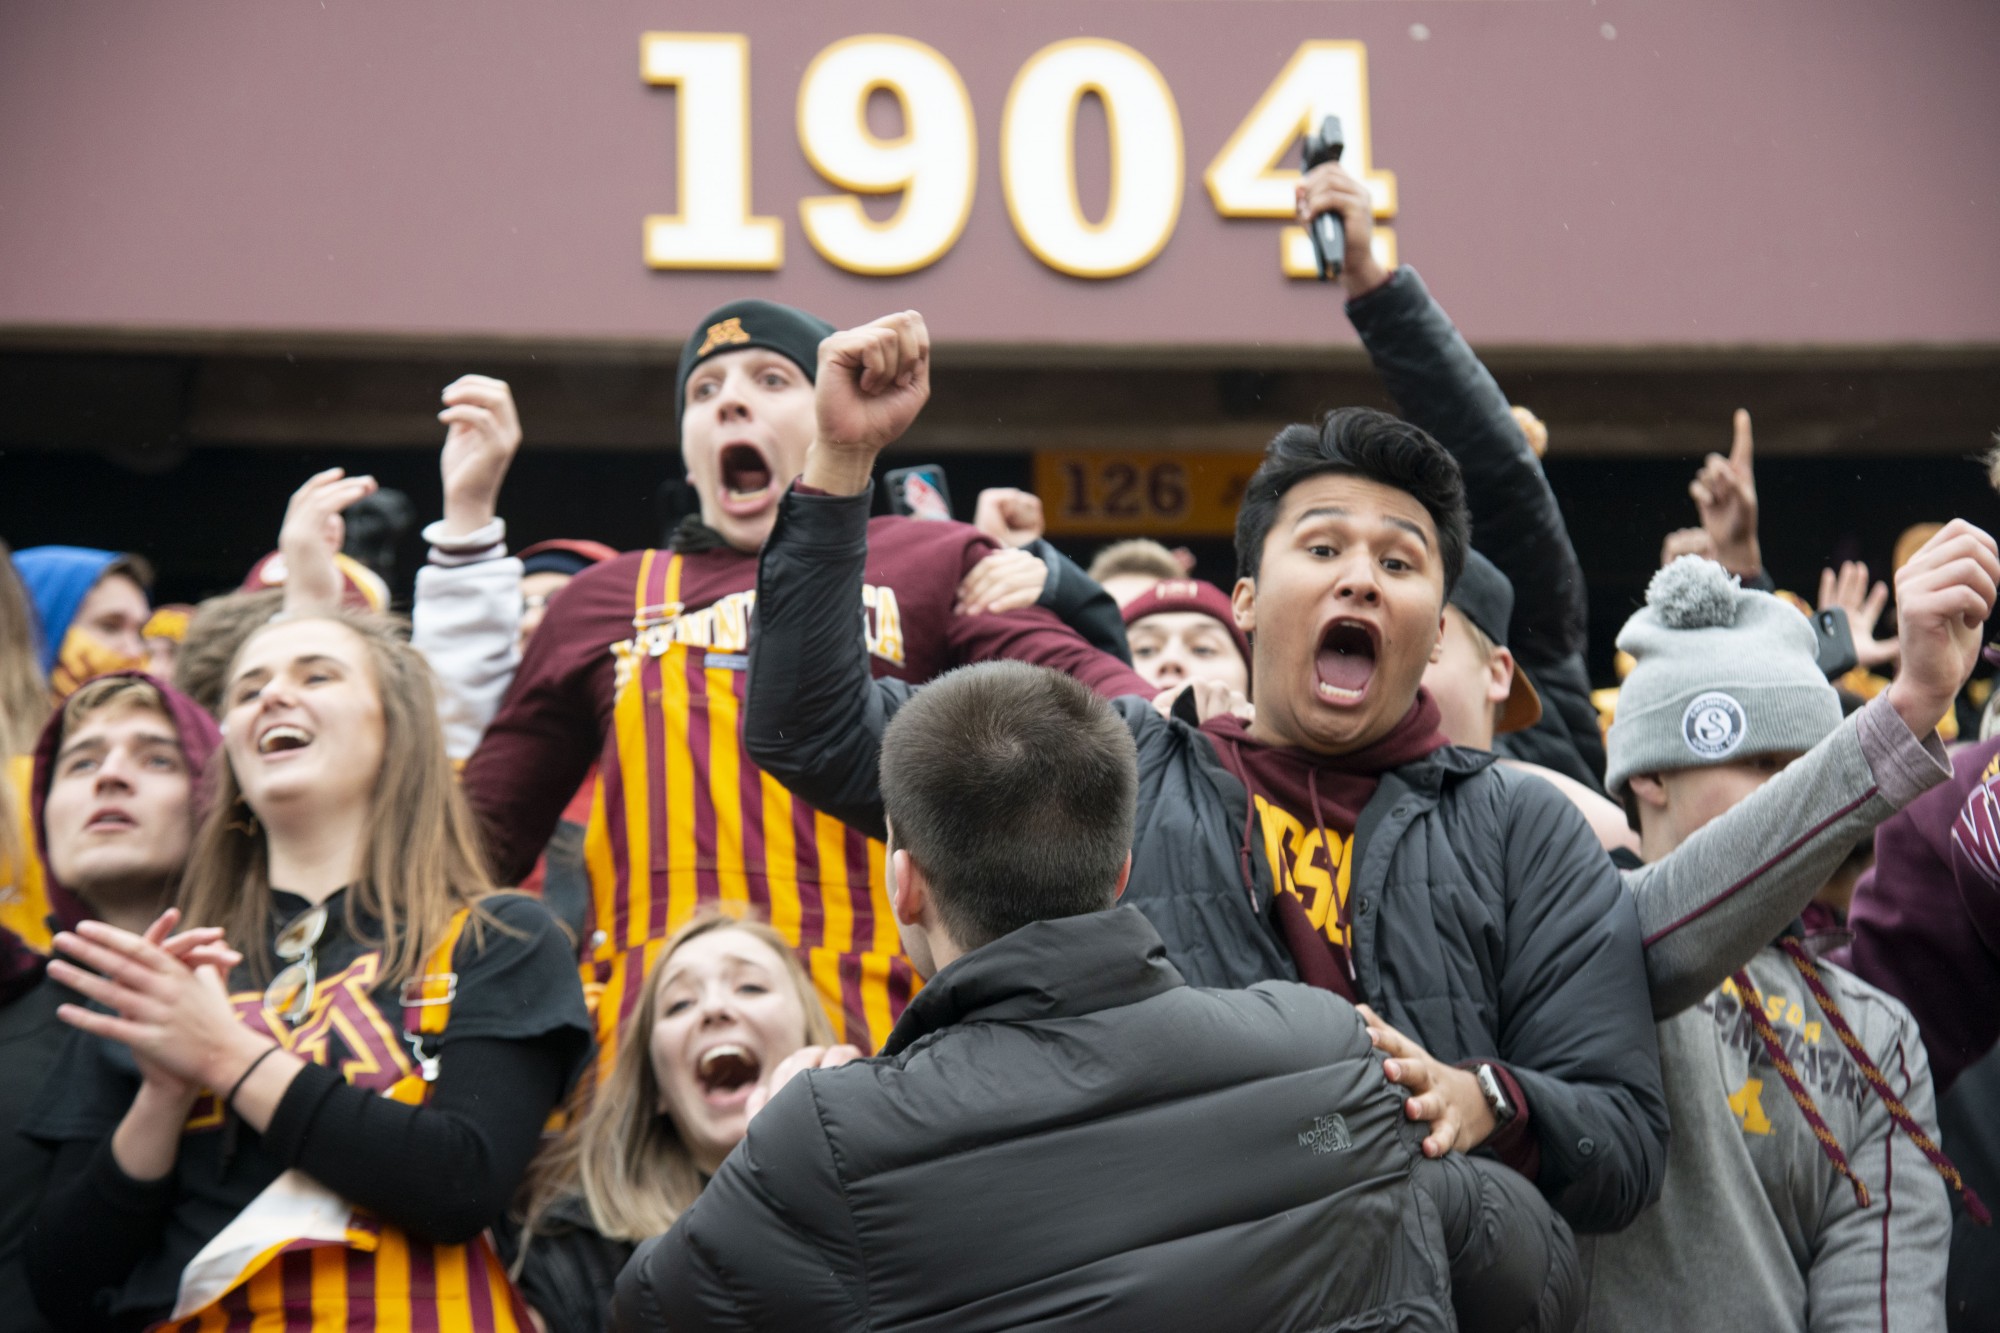 Fans cheer for the Gophers after winning the game against Penn State at TCF Bank Stadium Saturday, Nov. 9. The Gophers won 31-26 bringing their record to 9-0. A first since 1904.
